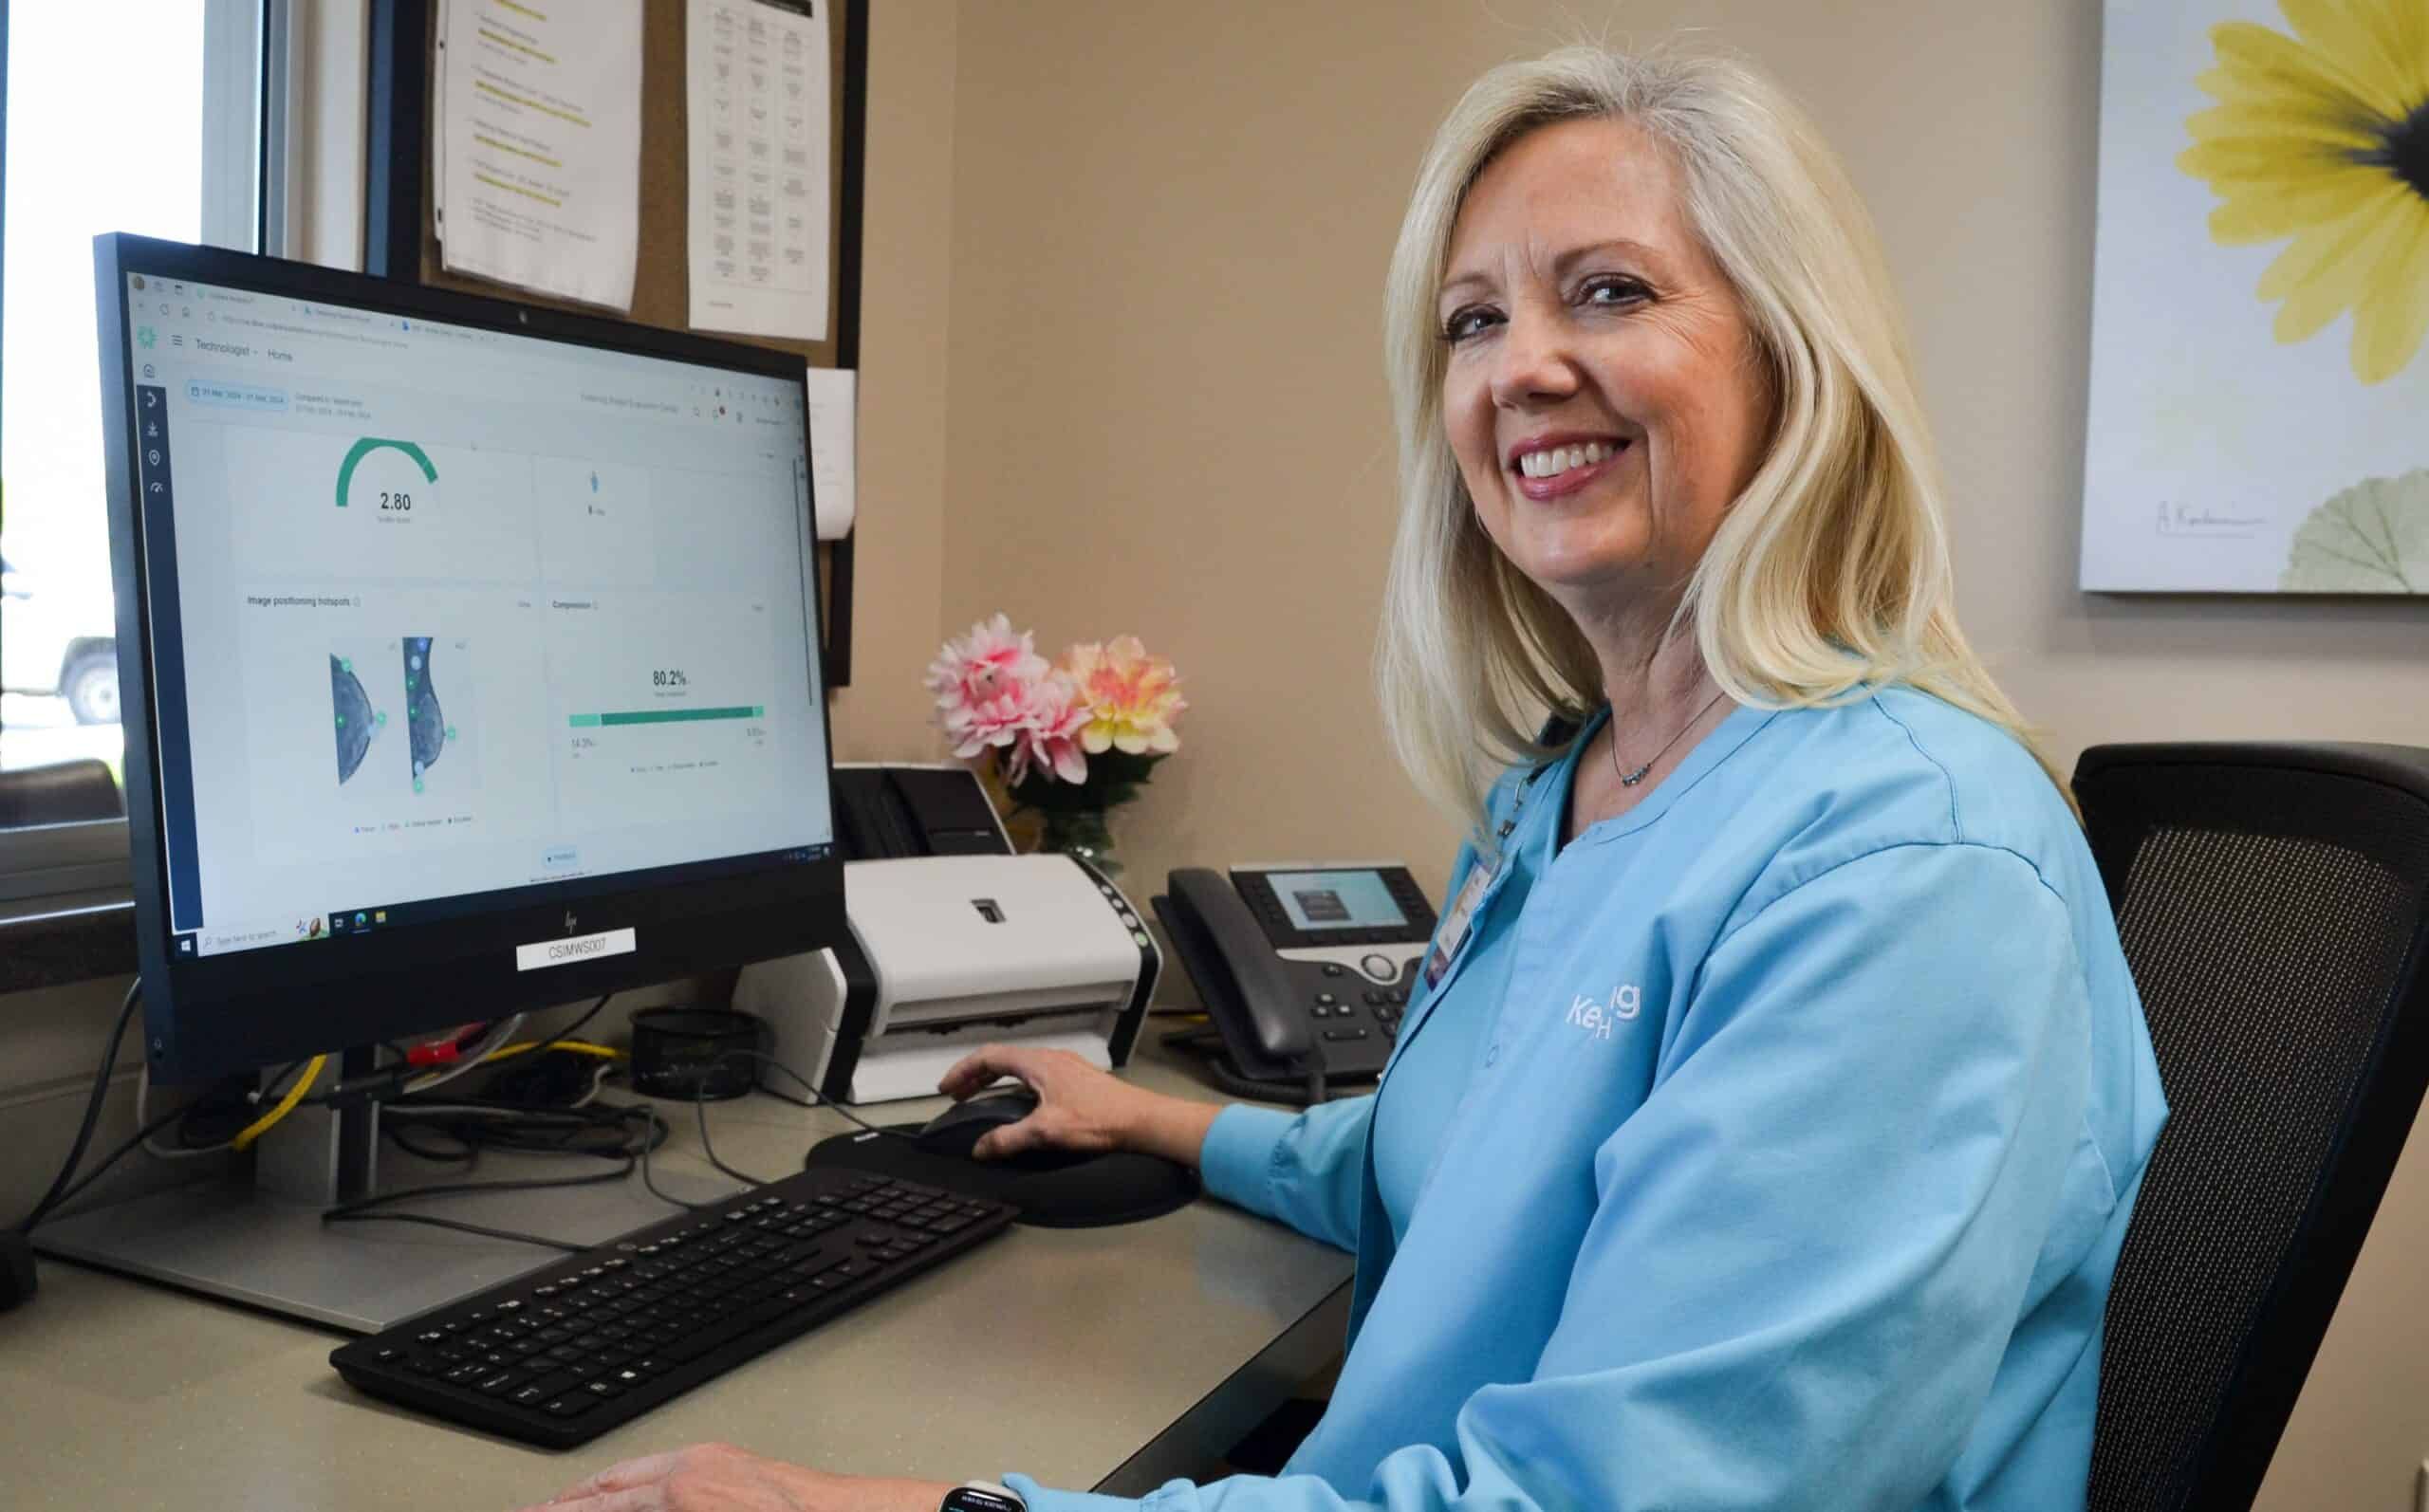 Mammography technologist Teresa Young showing Volpara Health AI Technology on computer screen